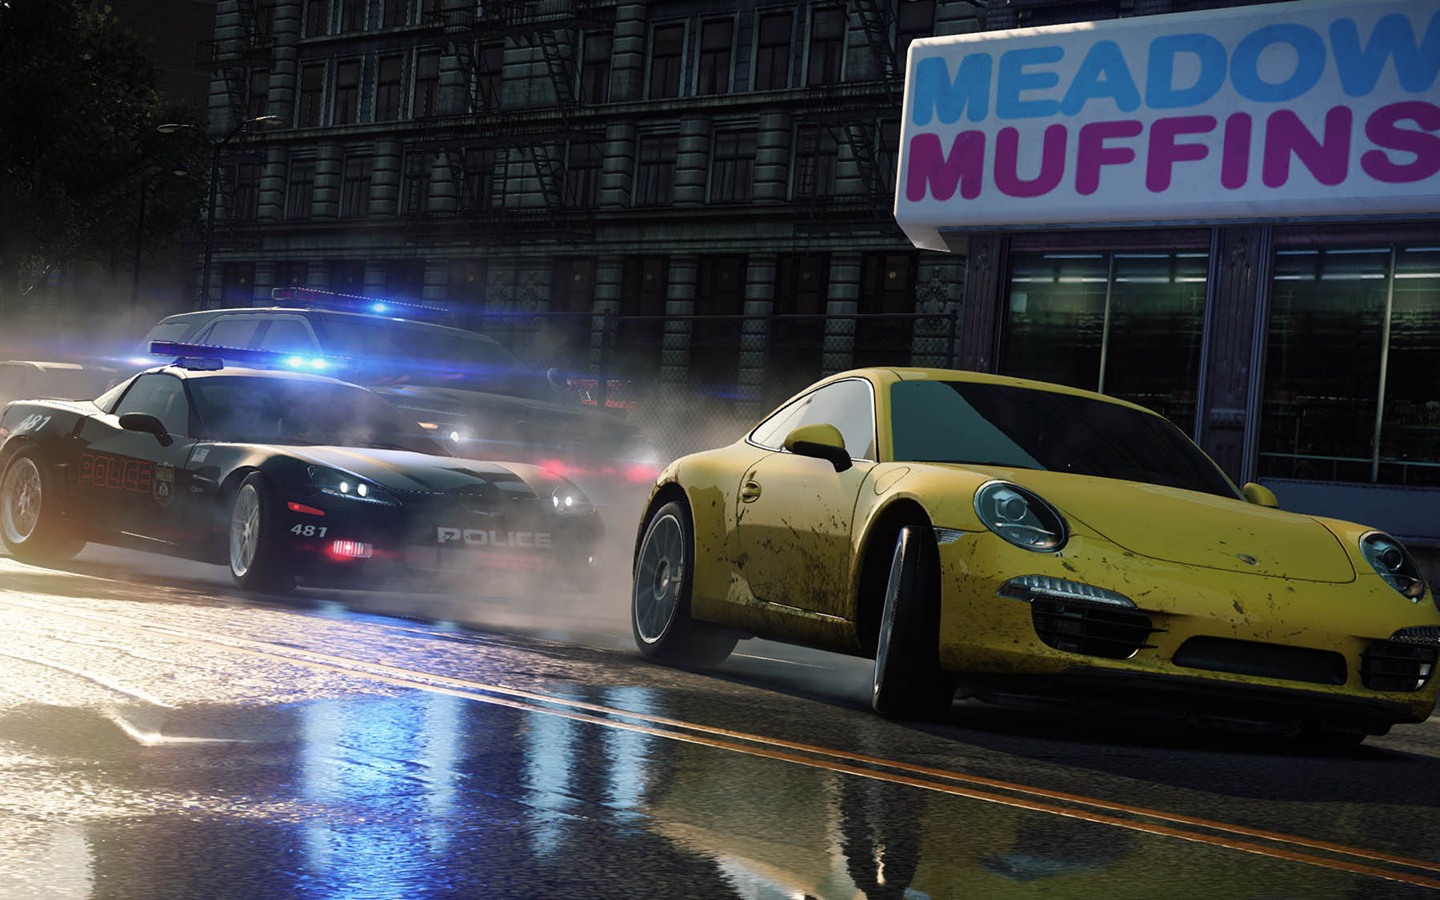 Need for Speed: Most Wanted 极品飞车17：最高通缉 高清壁纸17 - 1440x900